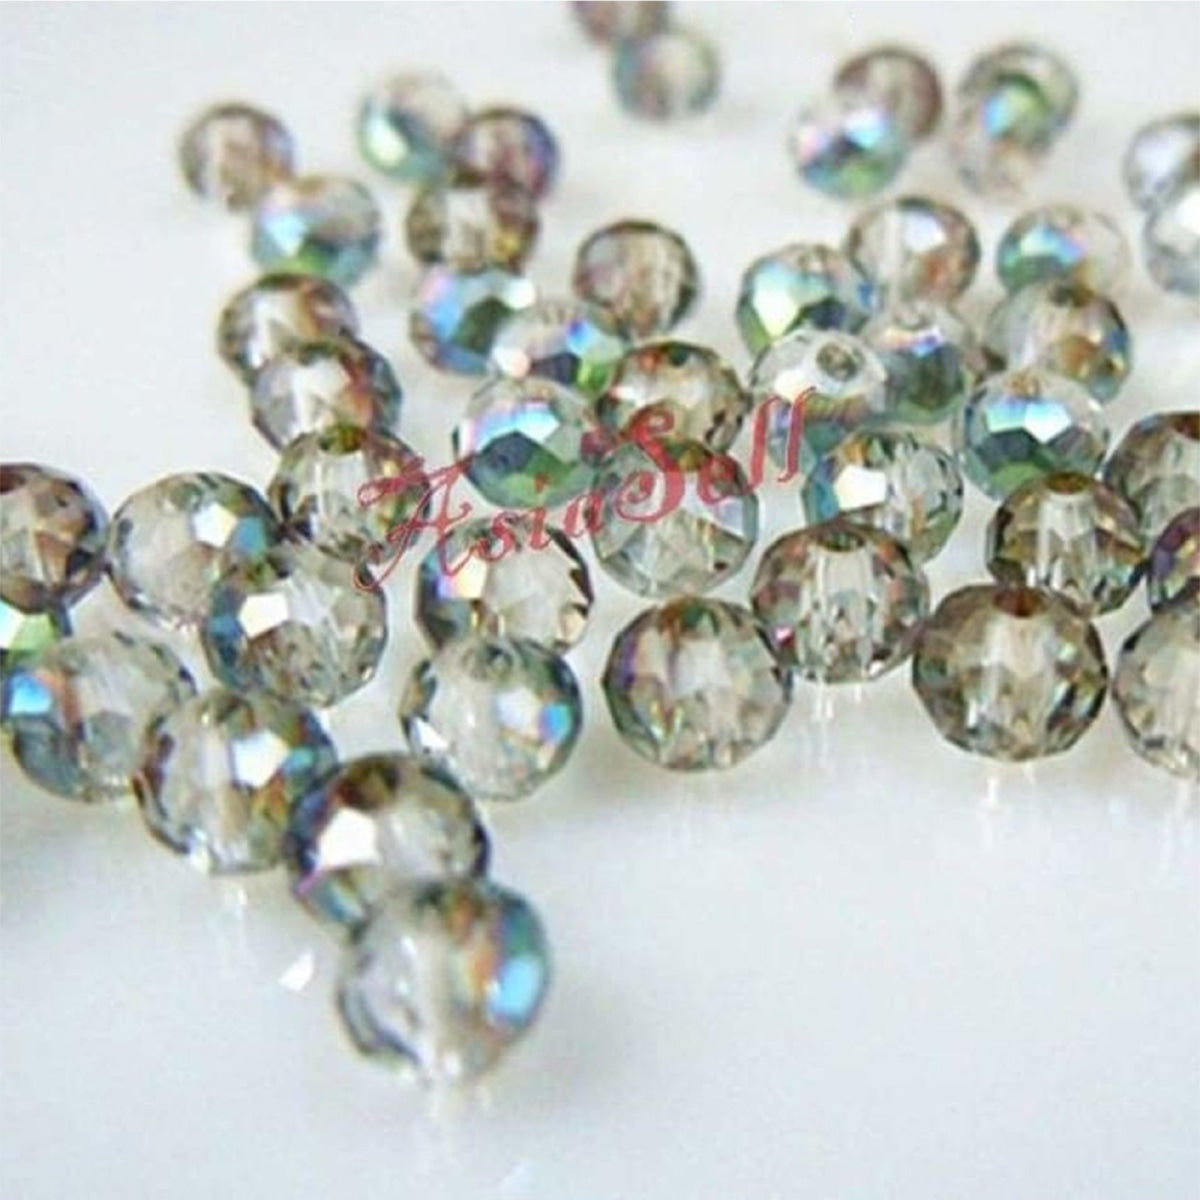 145Pcs 3X4Mm Faceted Crystal Glass Beads Spacers Round Jewellery Making A Bracelets